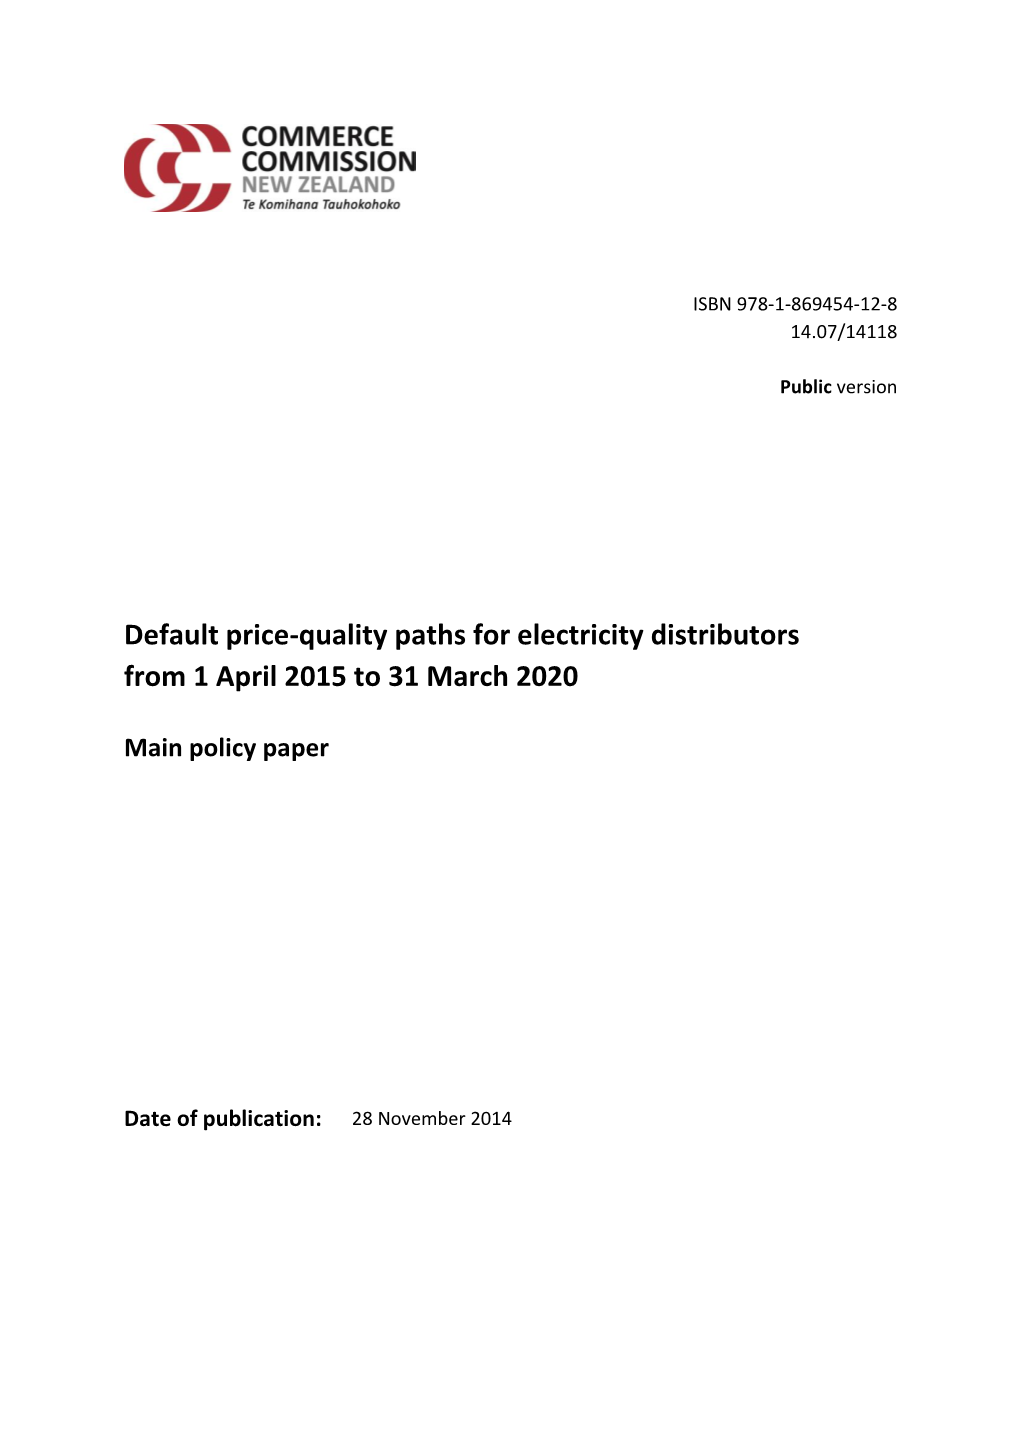 Default Price-Quality Paths for Electricity Distributors from 1 April 2015 to 31 March 2020